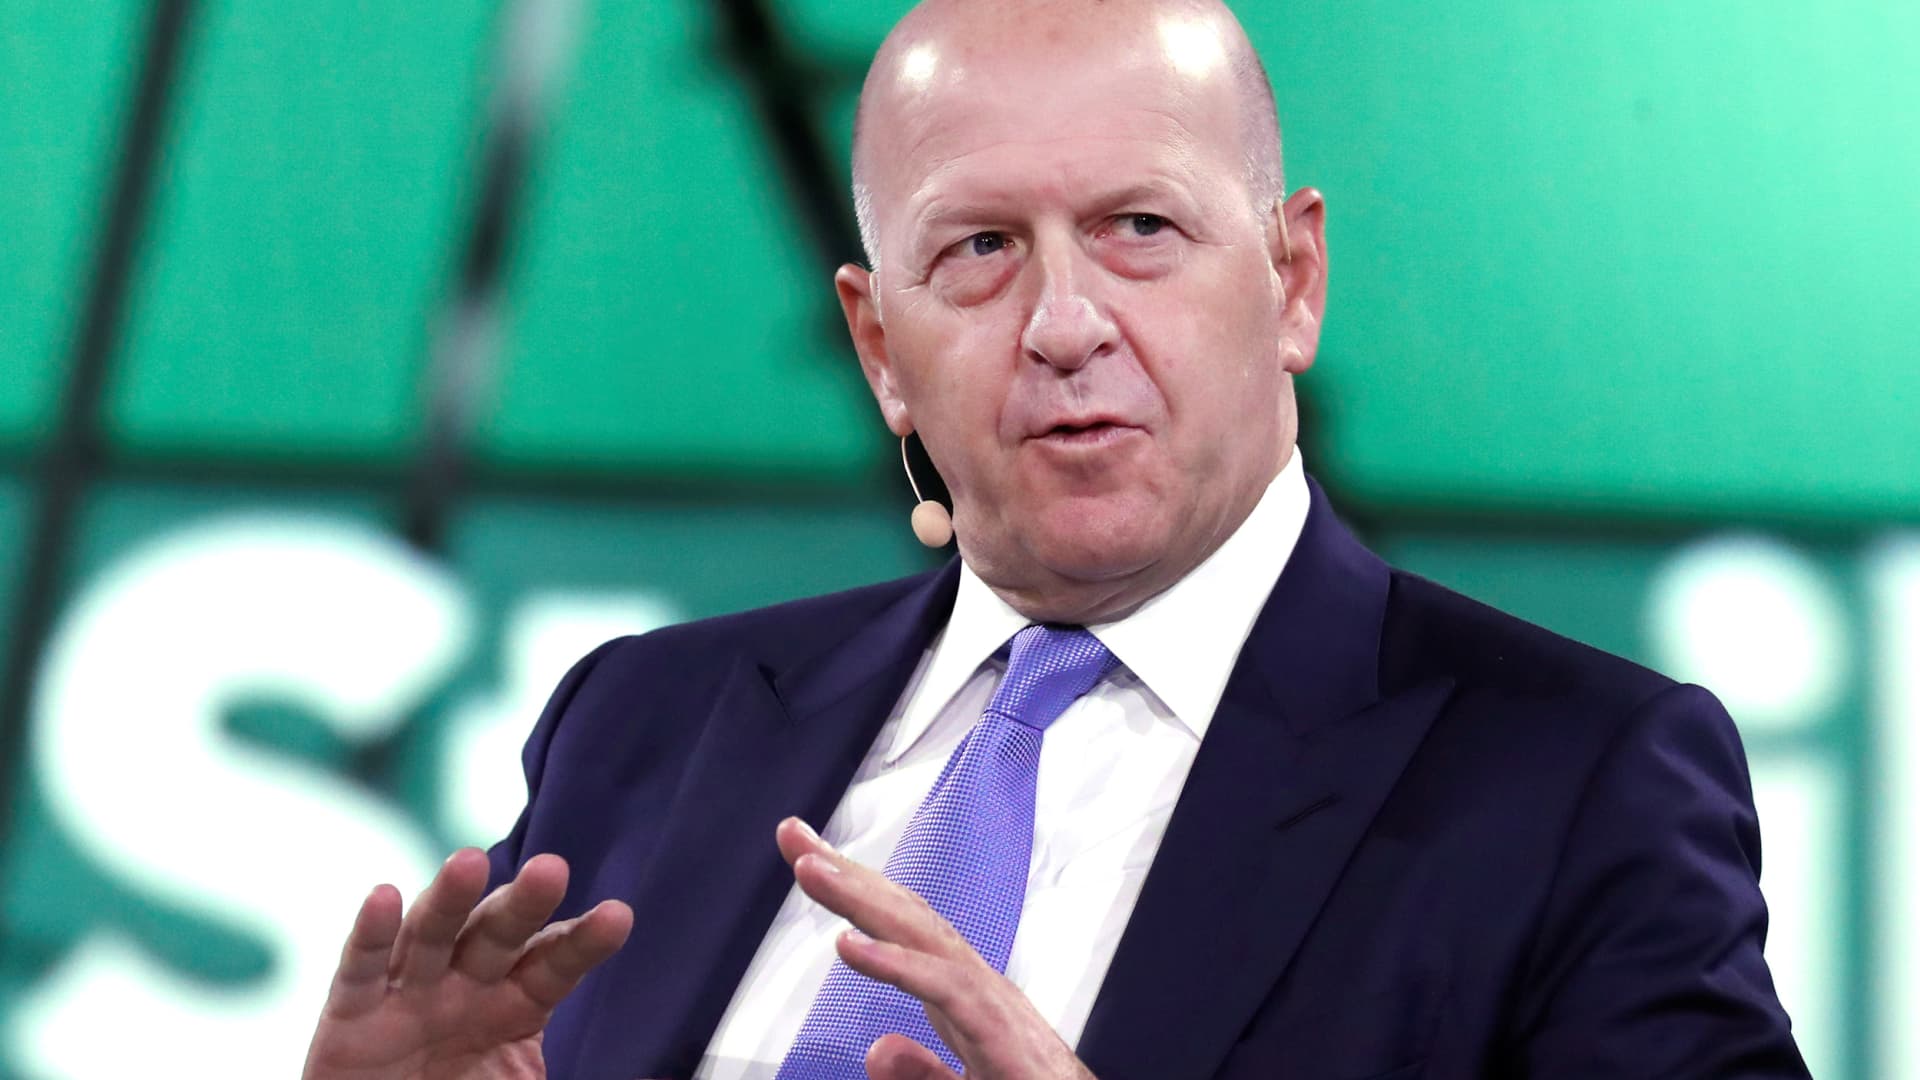 Goldman Sachs CEO advises clients to be cautious because Fed policy has unpredictable consequences – CNBC